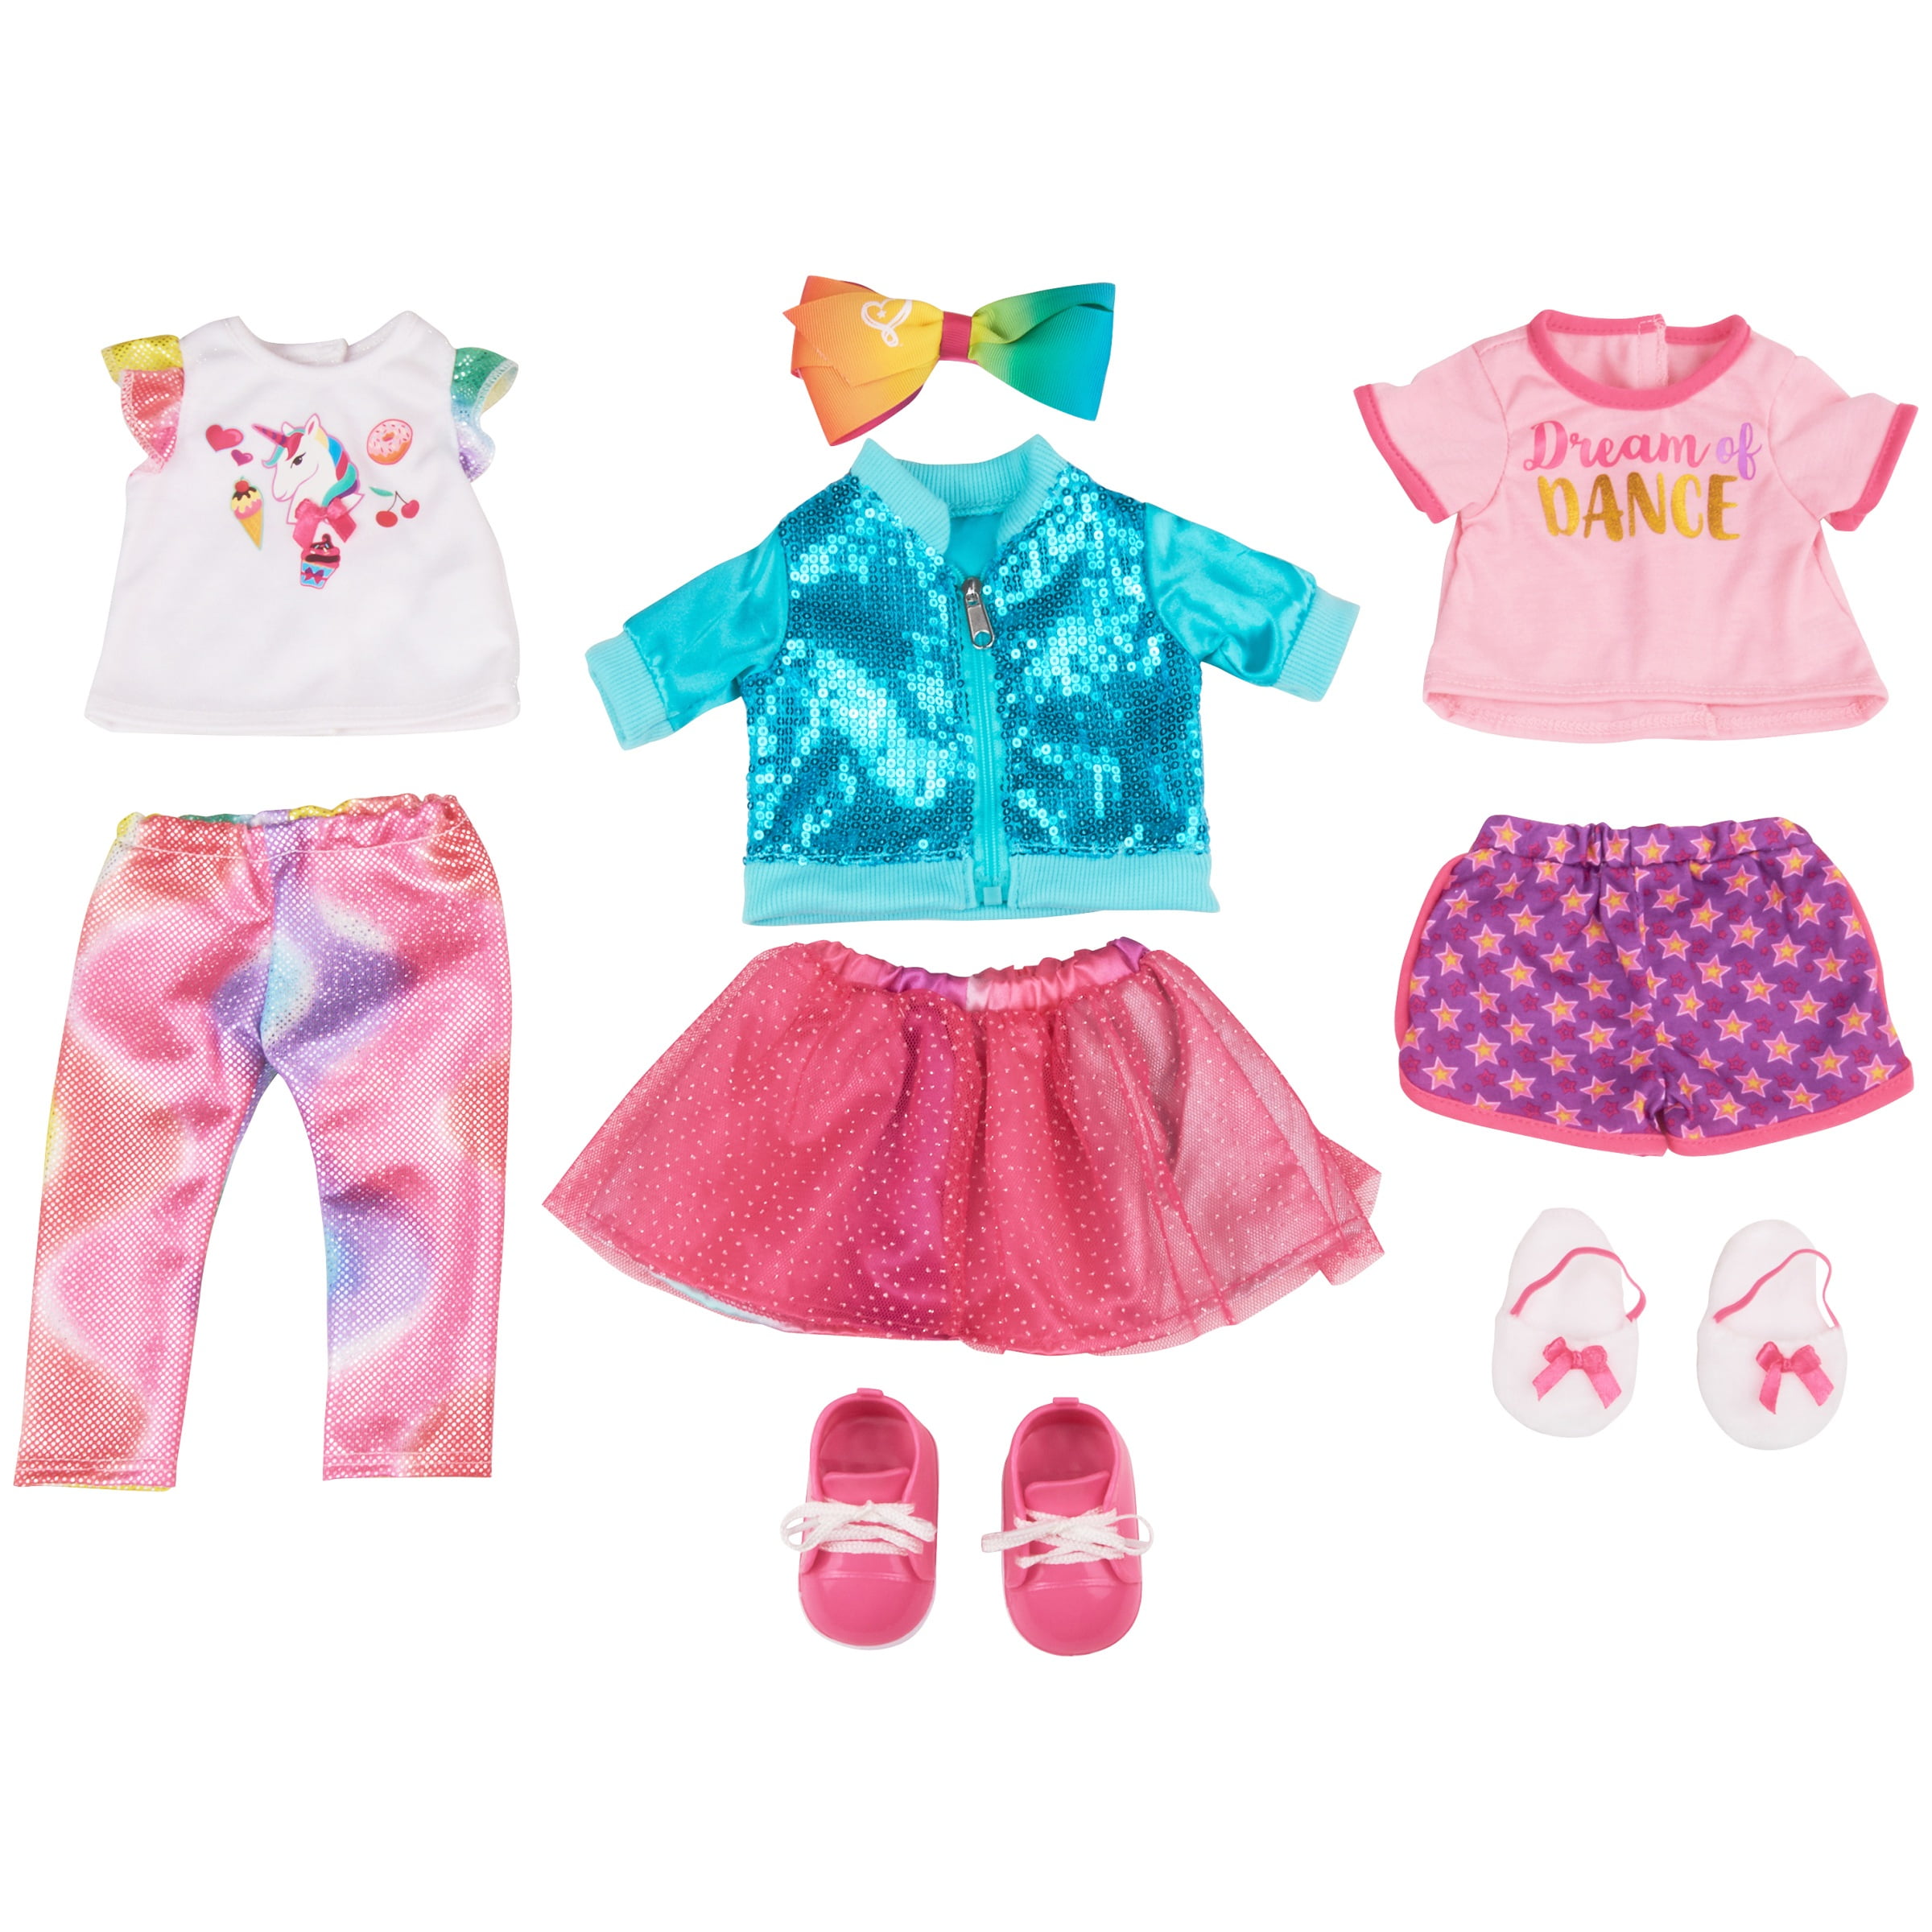 American Girl Doll Clothes At Walmart Offers Sale, Save 64% | jlcatj.gob.mx